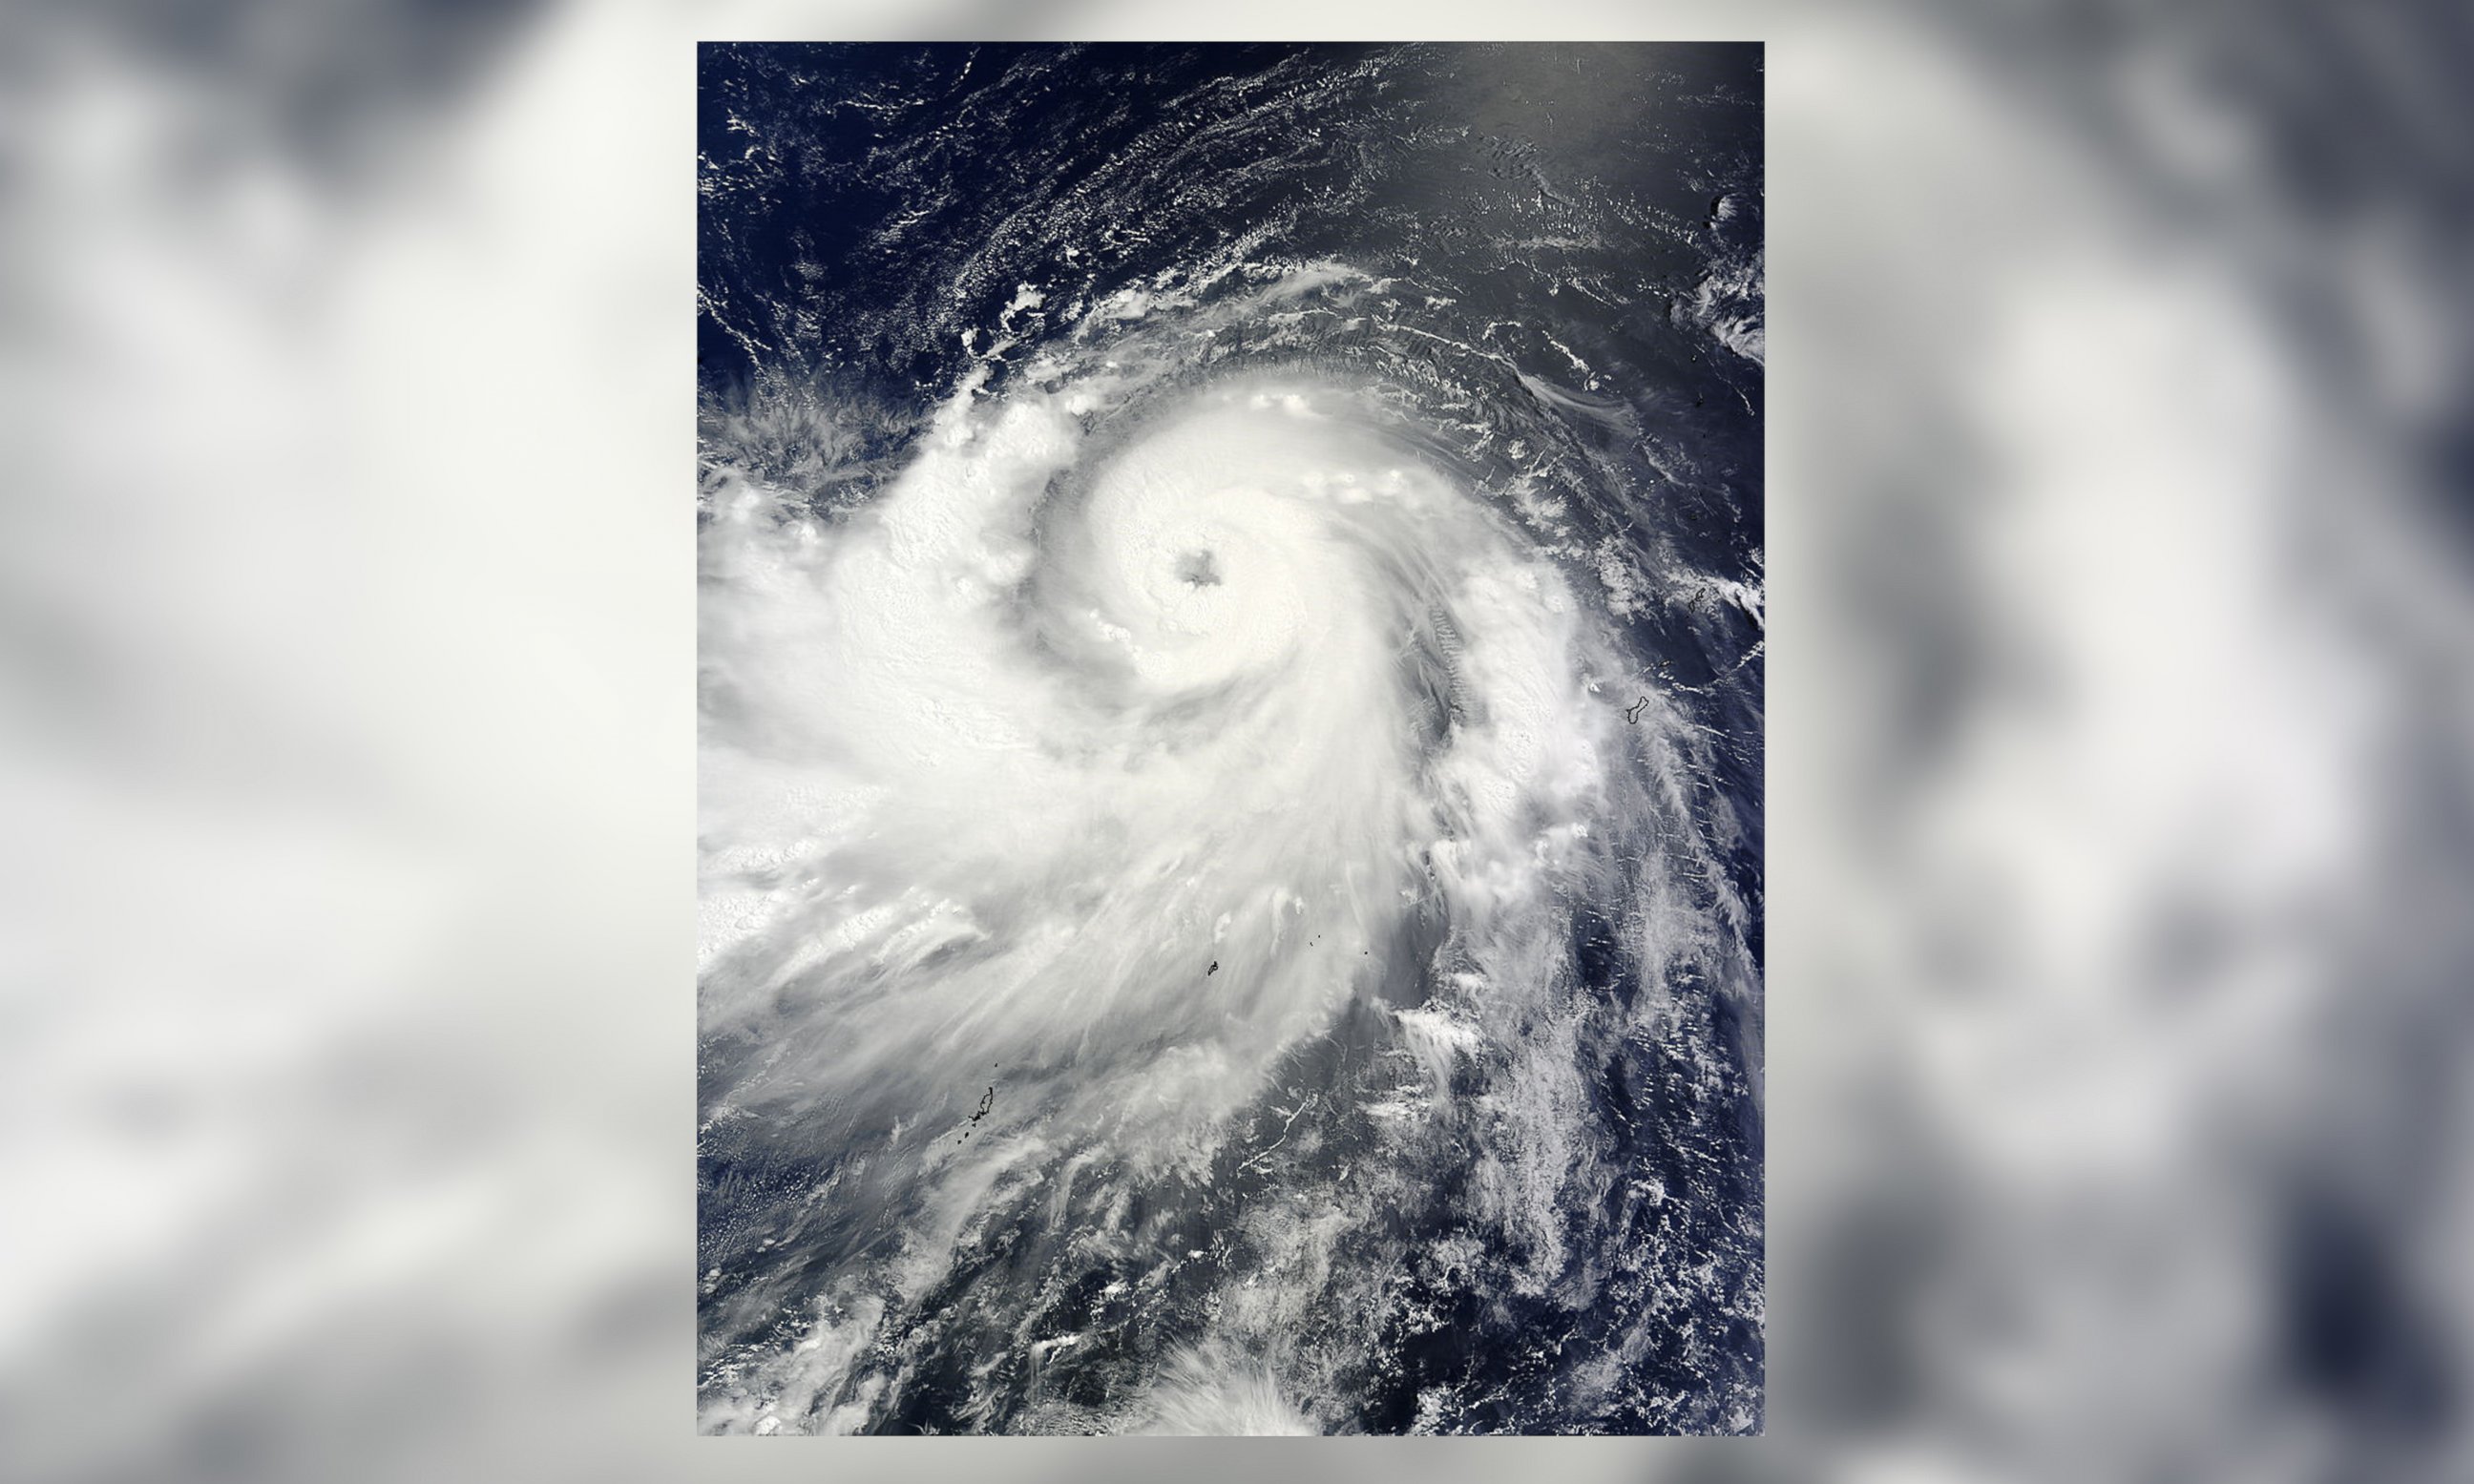 PHOTO: The MODIS instrument aboard NASA's Terra satellite captured this visible image of Typhoon Neoguri on the evening of July 4, 2014 as it moved through the Northwestern Pacific Ocean.